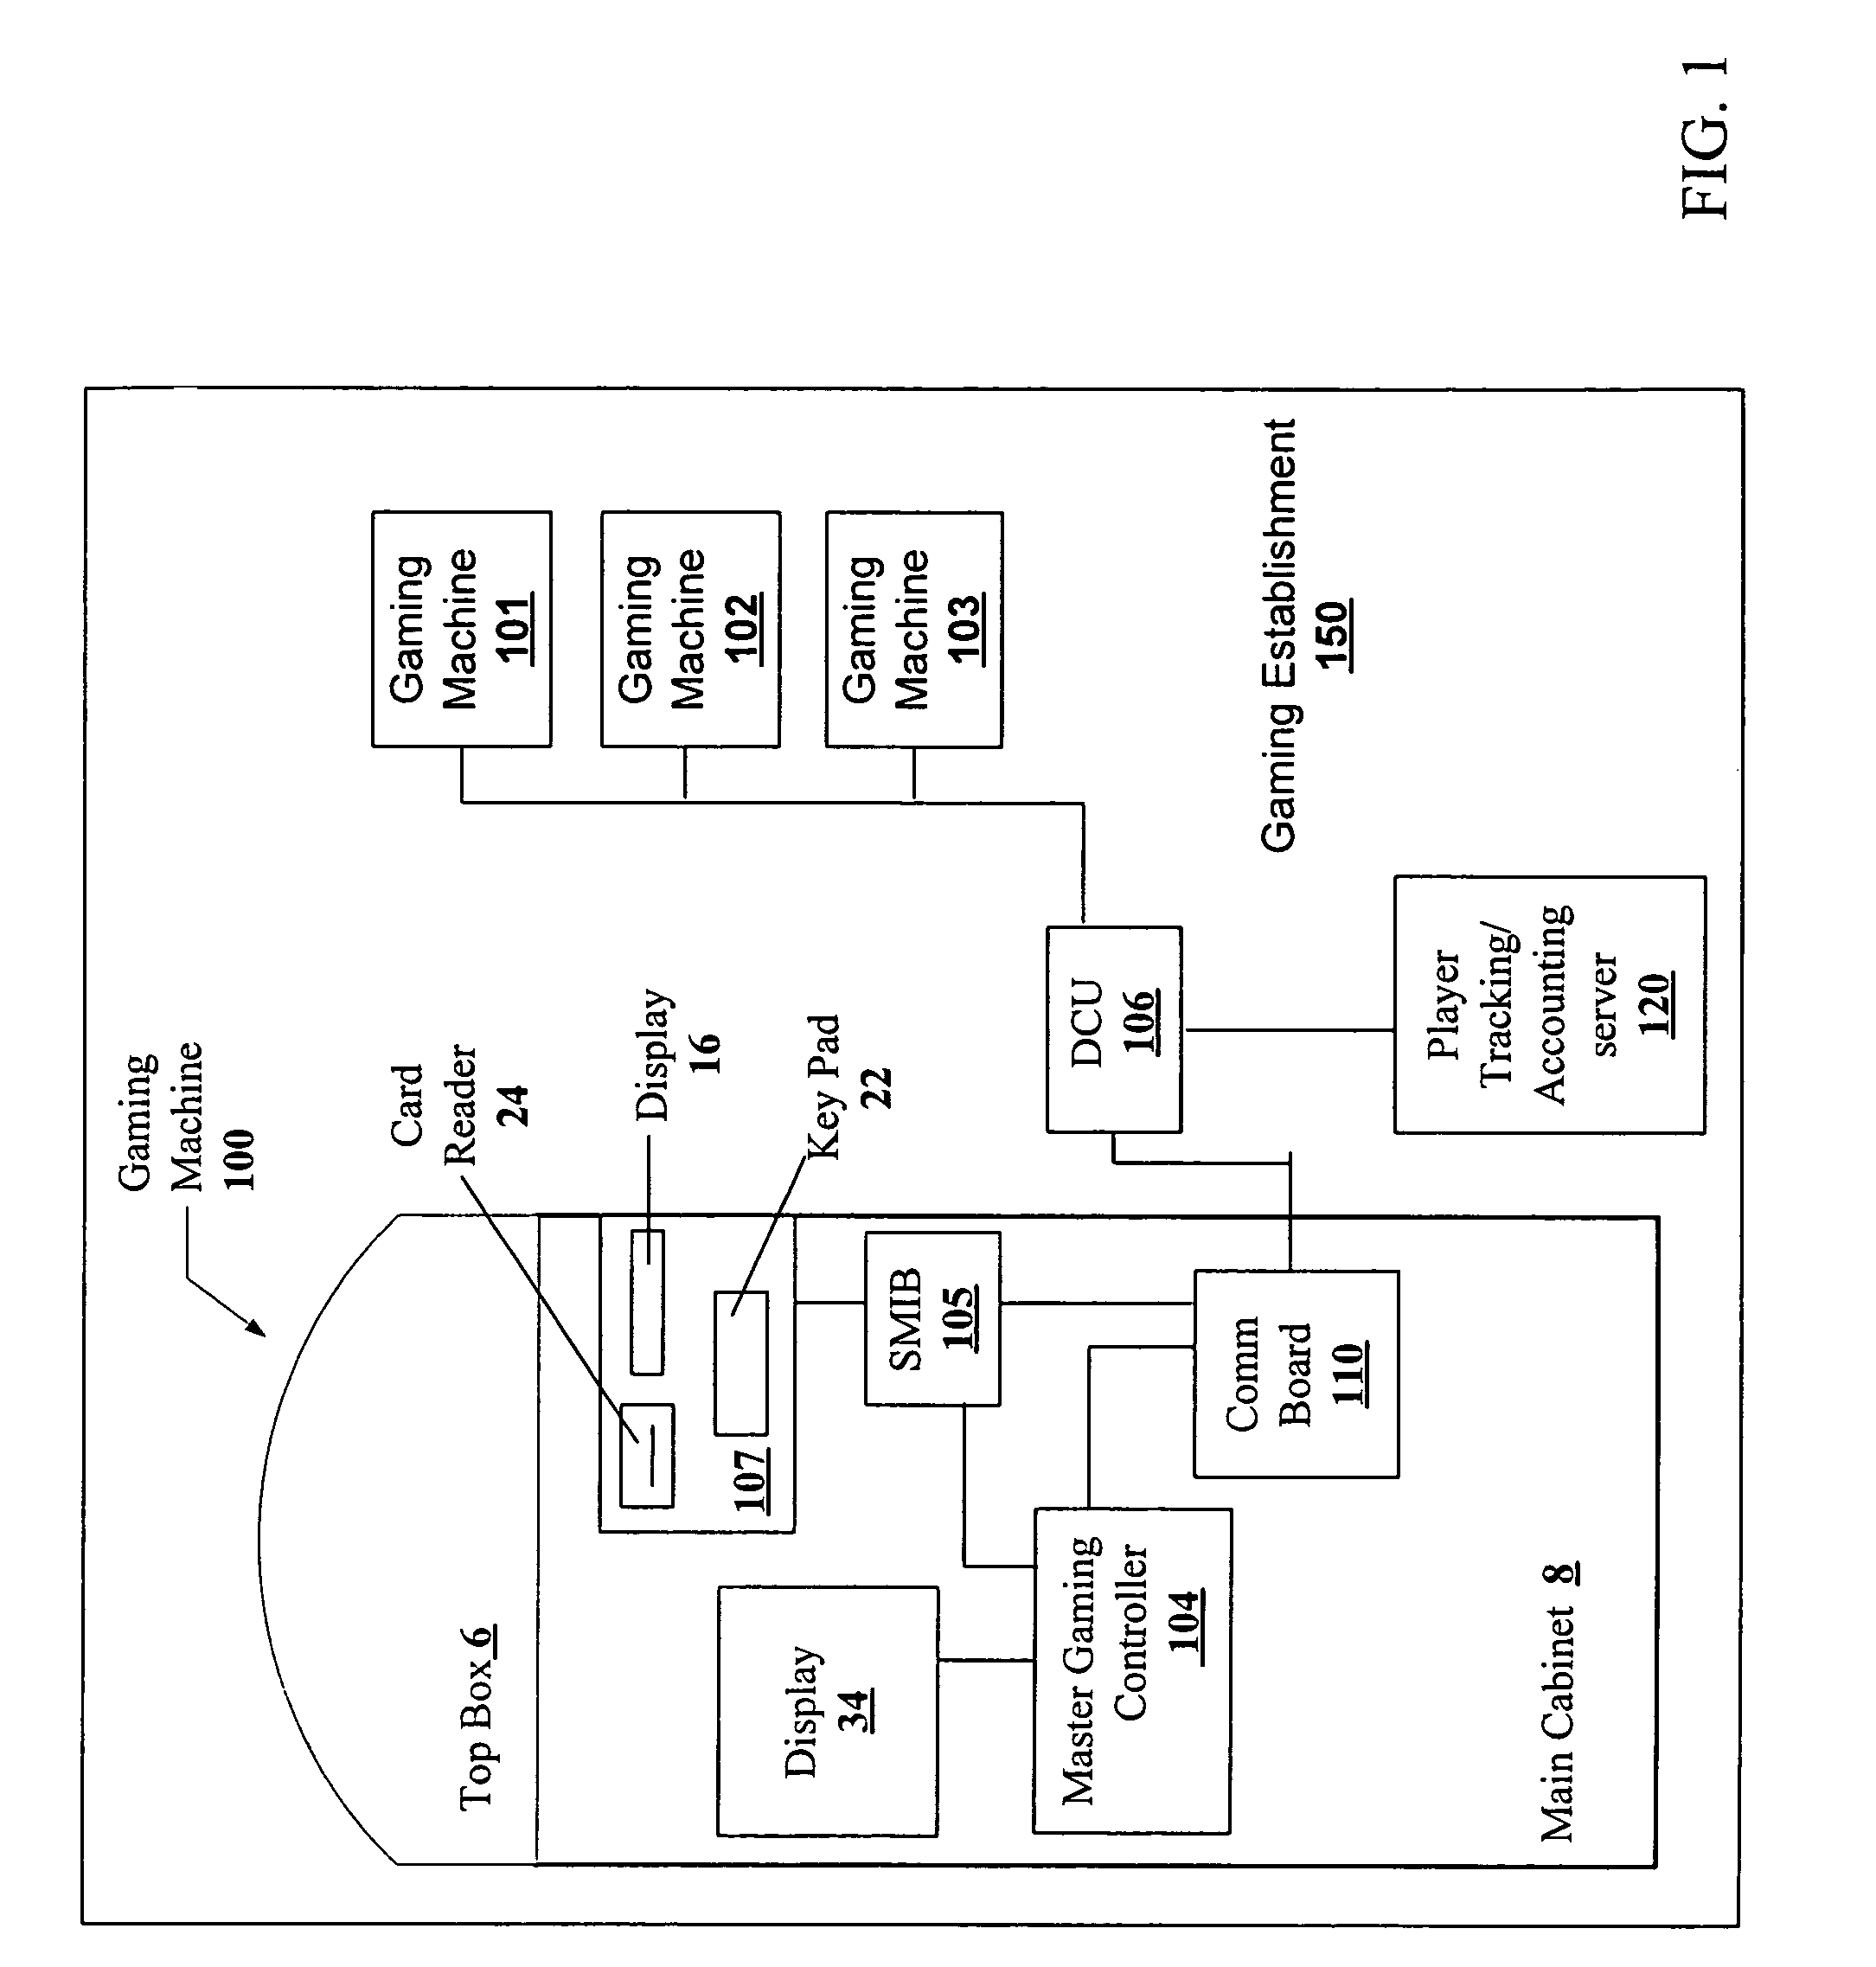 Module for providing additional capabilities to a gaming machine